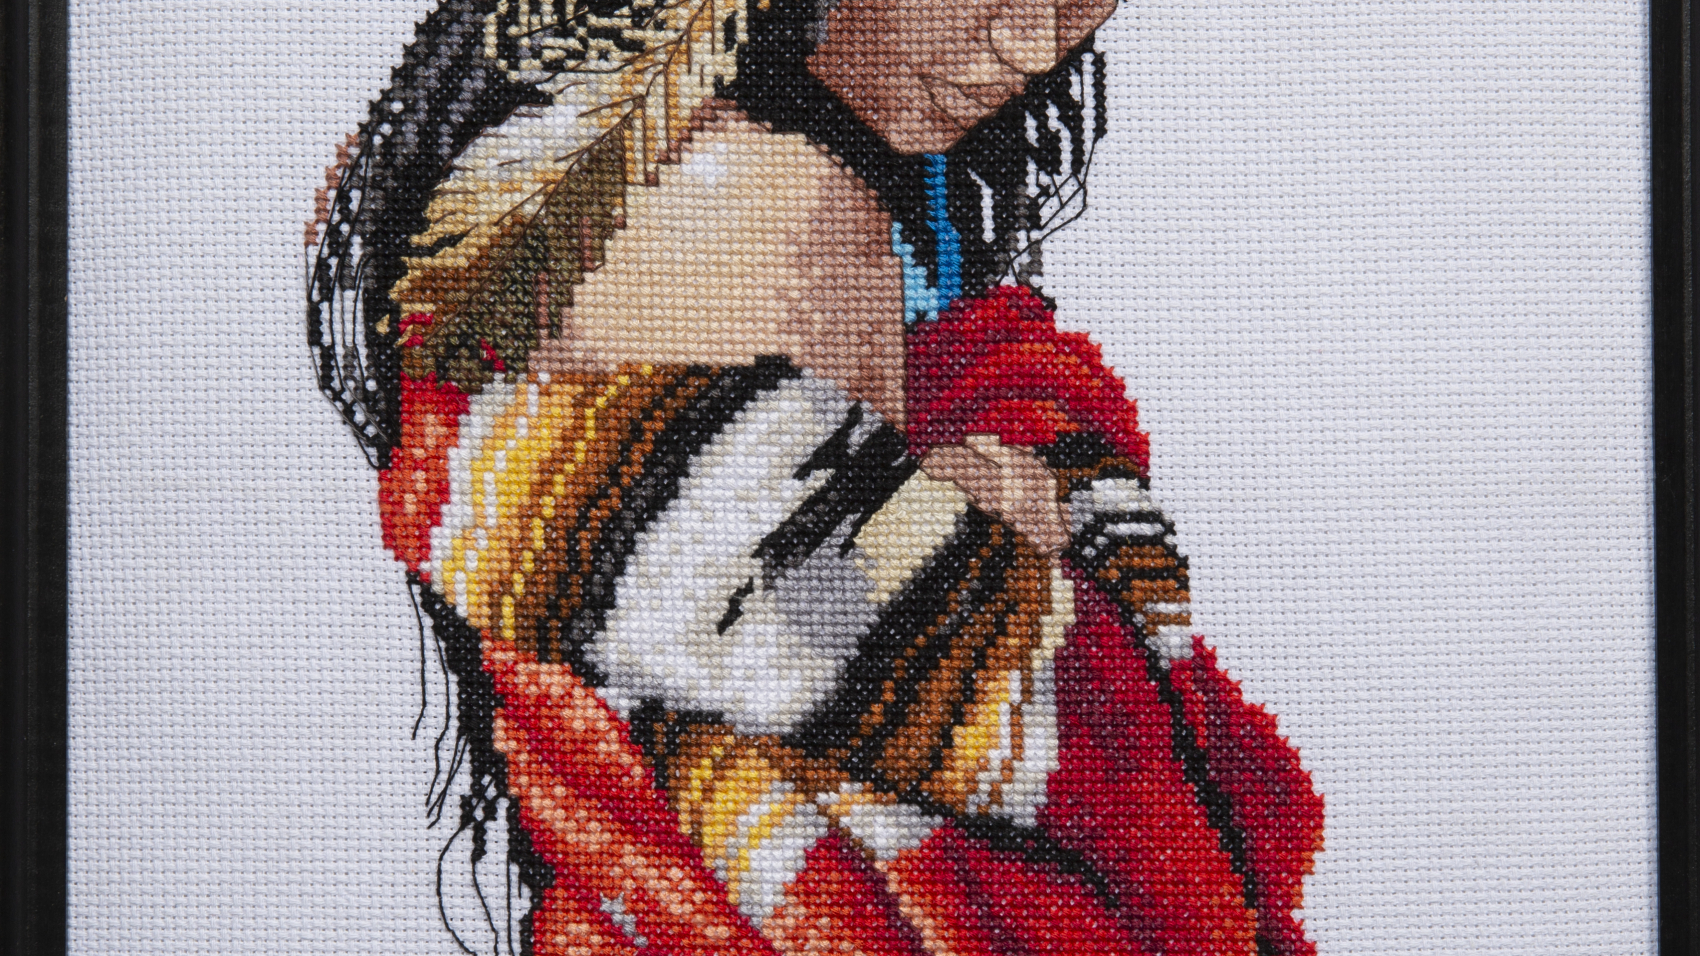 Needlework - Indian Maiden - needlework of young indian maiden with various feathers in her hair and wrapped in colorful red, yellow, white and black blanket.